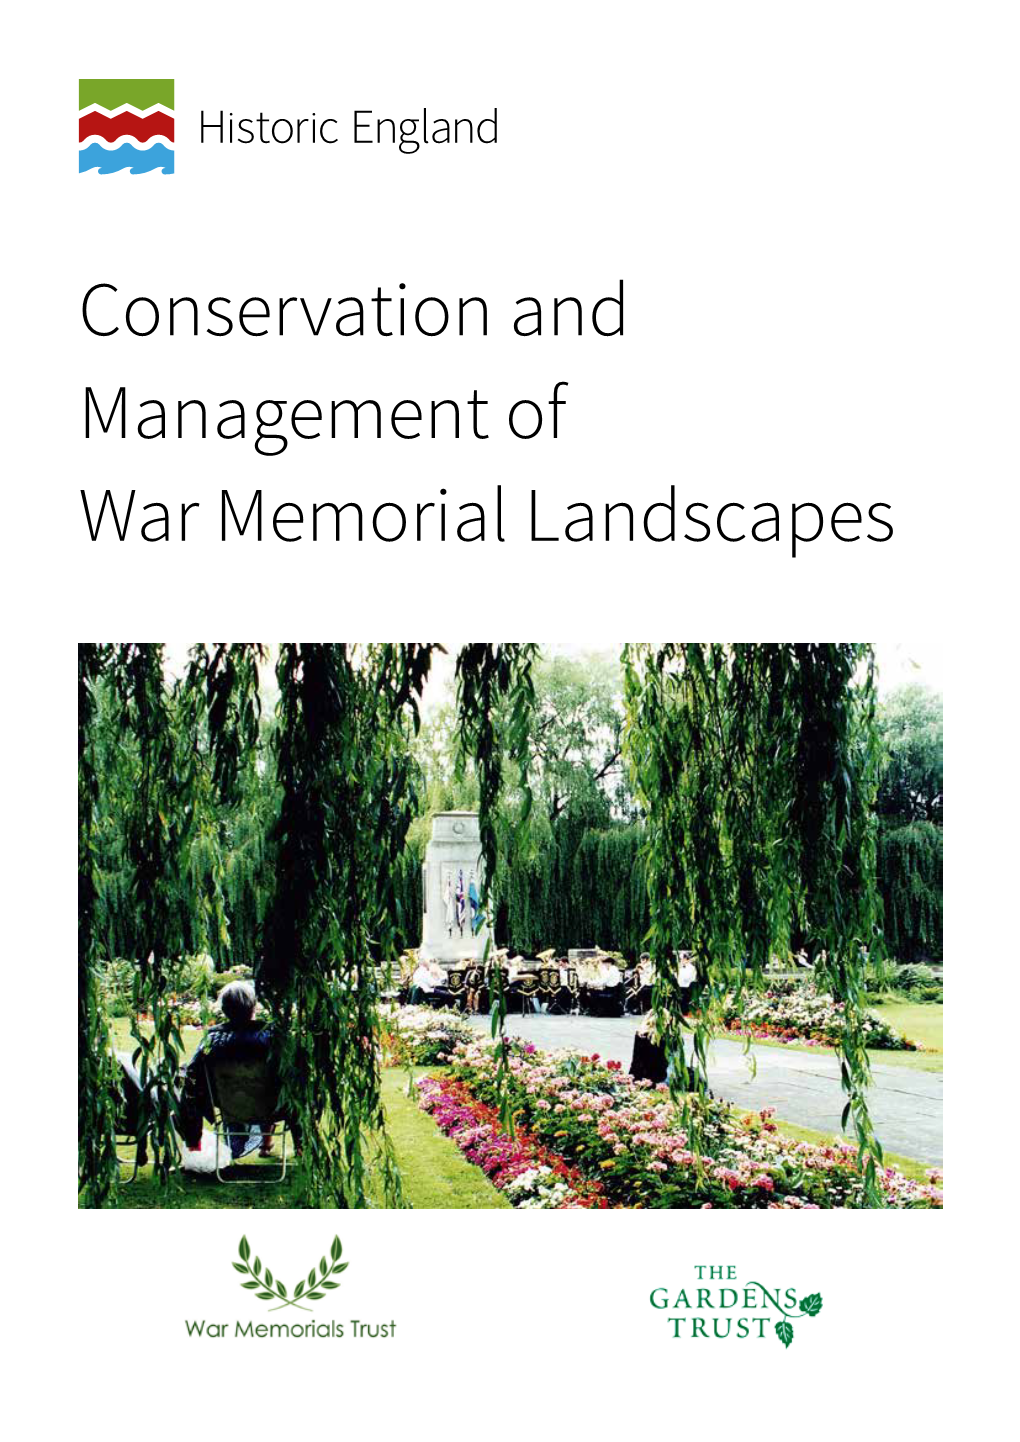 Conservation and Management of War Memorial Landscapes This Guidance Is One of Two Historic England Publications on the Care of War Memorials